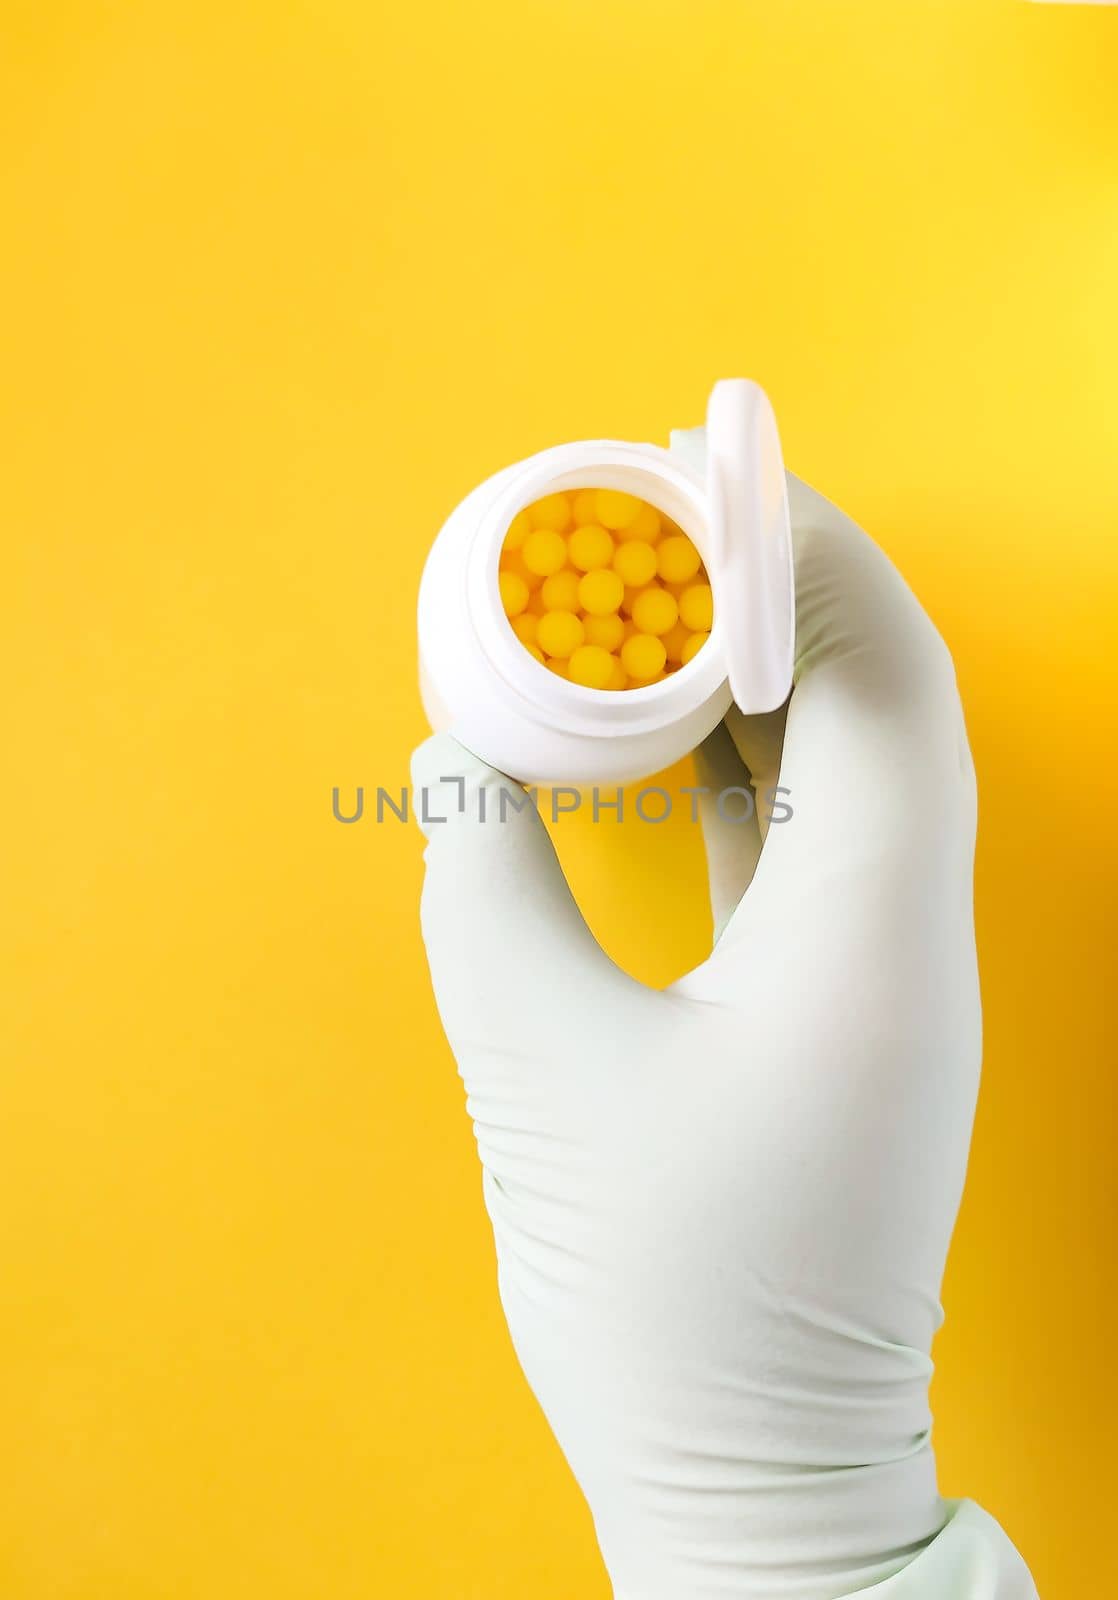 Hand in rubber glove holds vitamin C pills in a white plastic storage on bright yellow background